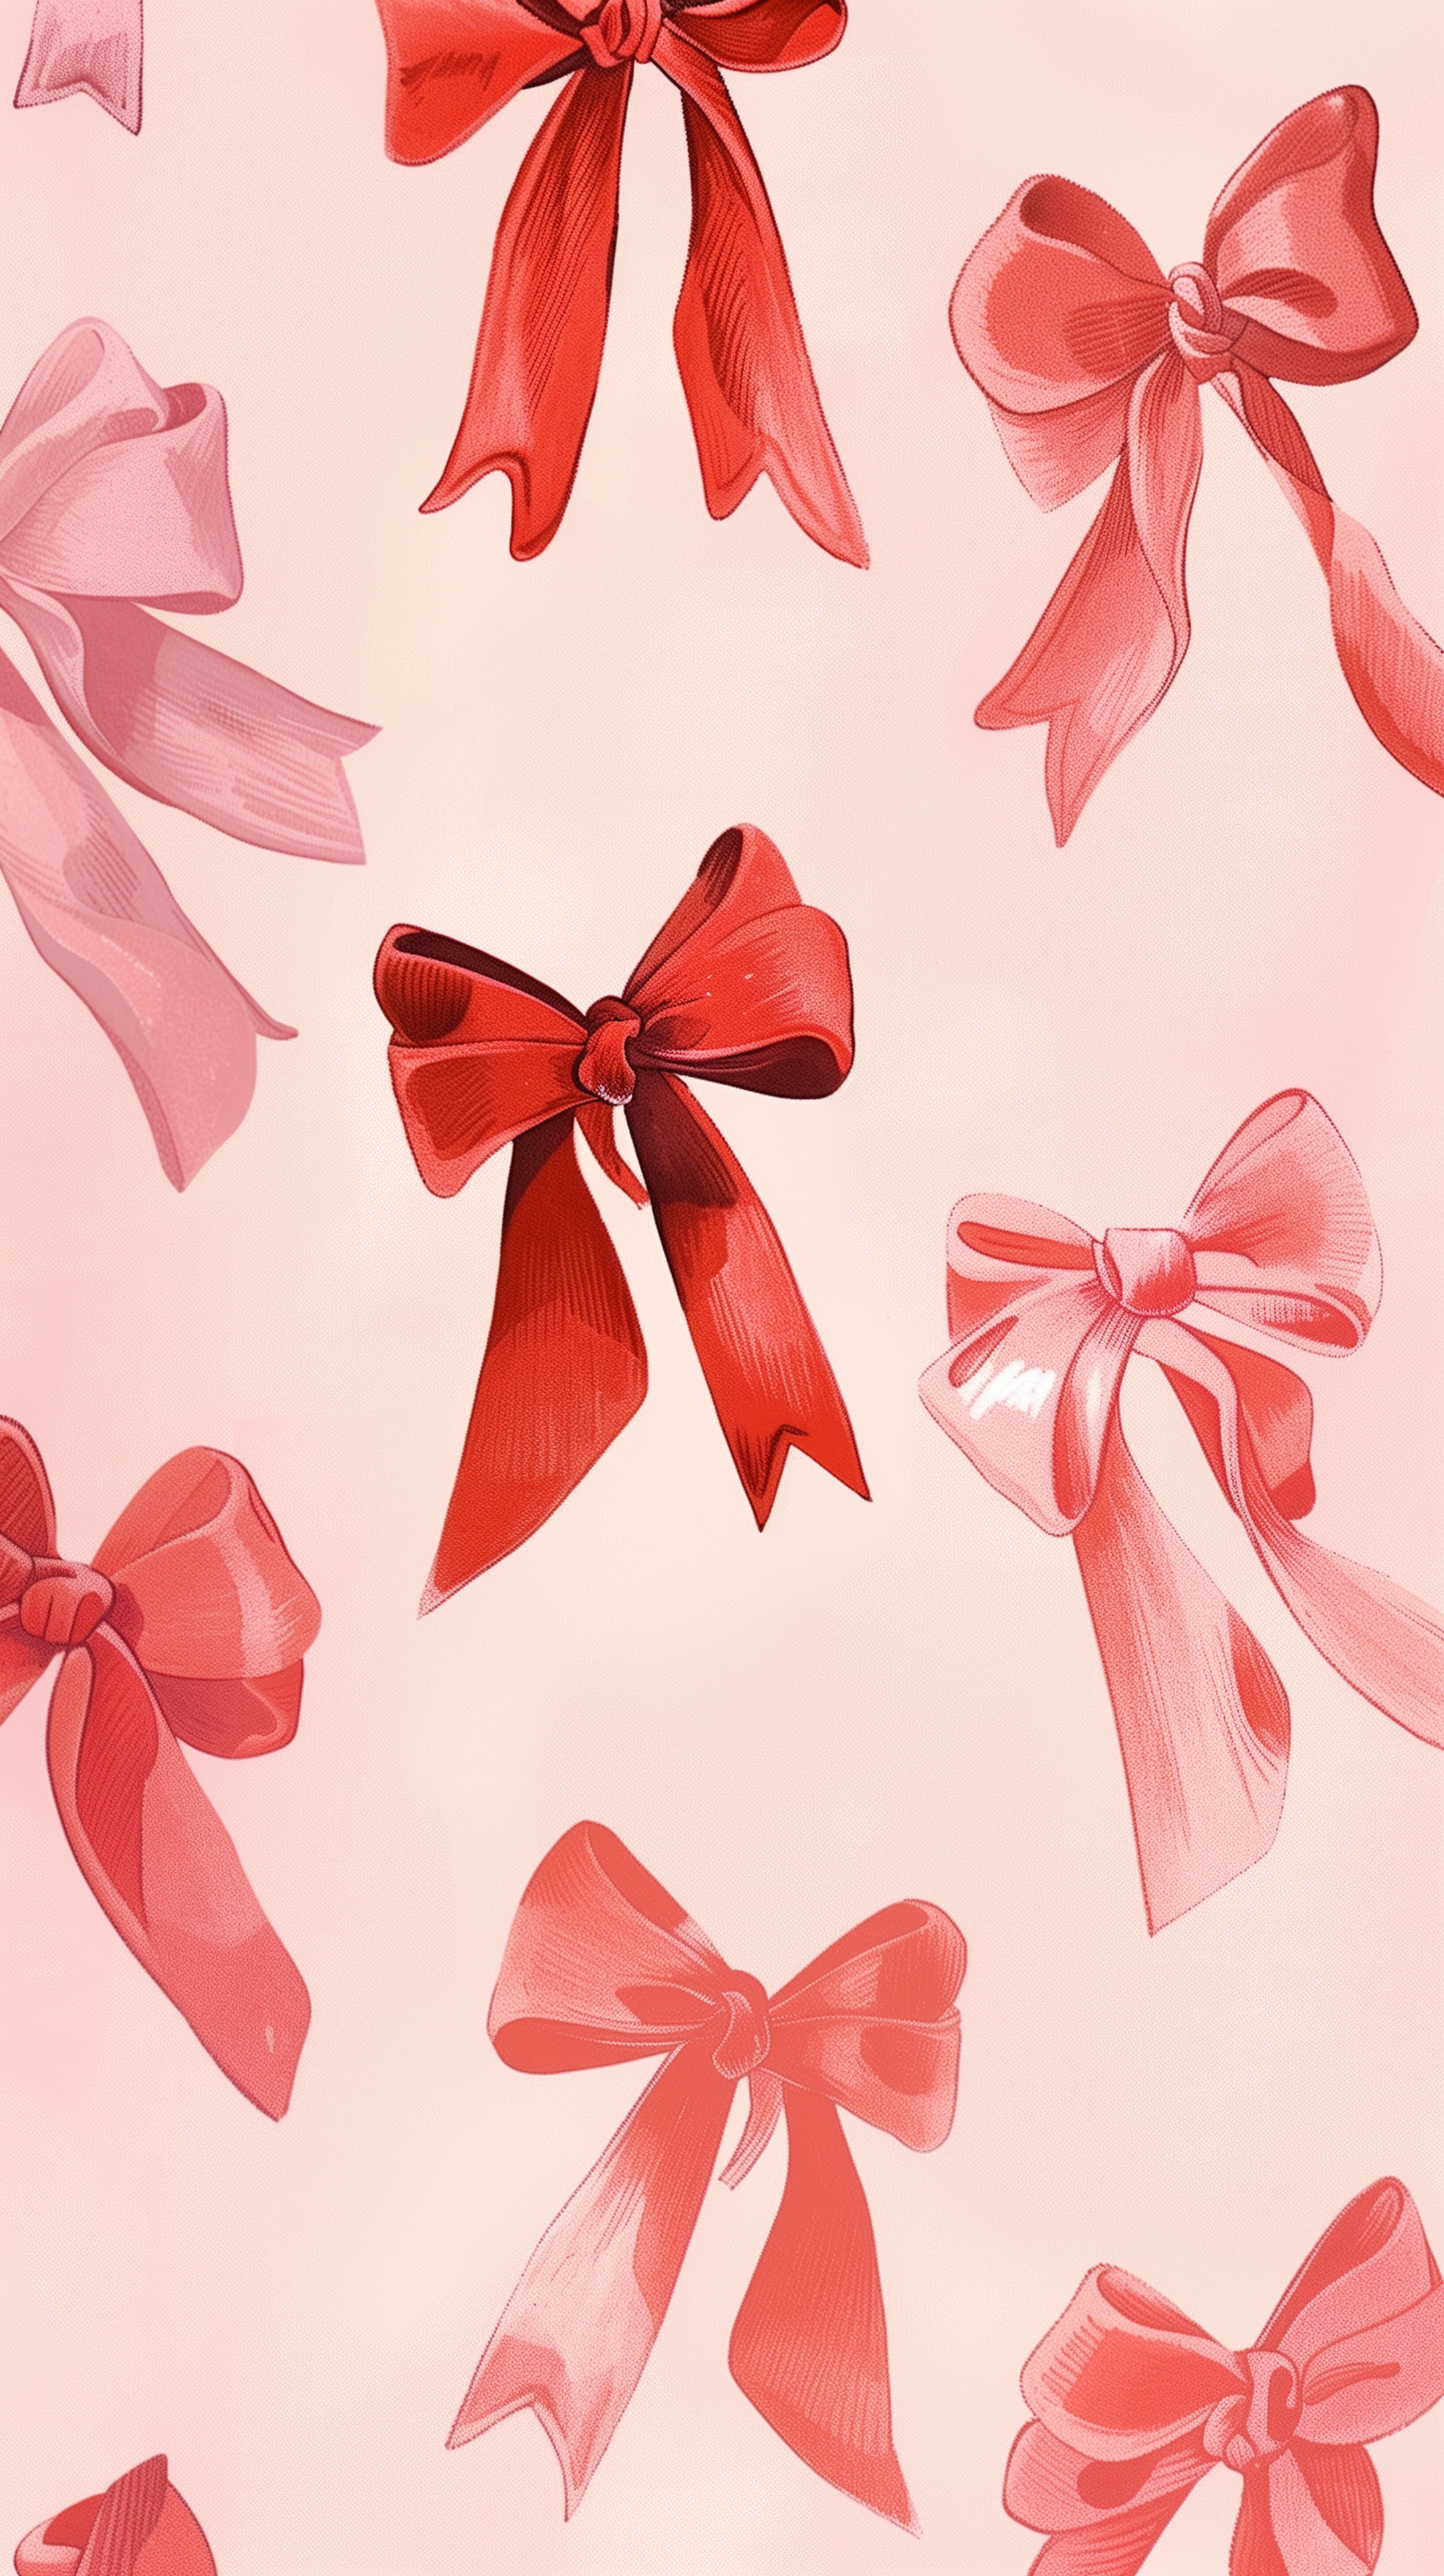 Pretty Pink Ribbons for Your Screen 벽지[f8723b9734e840c3ae5d]